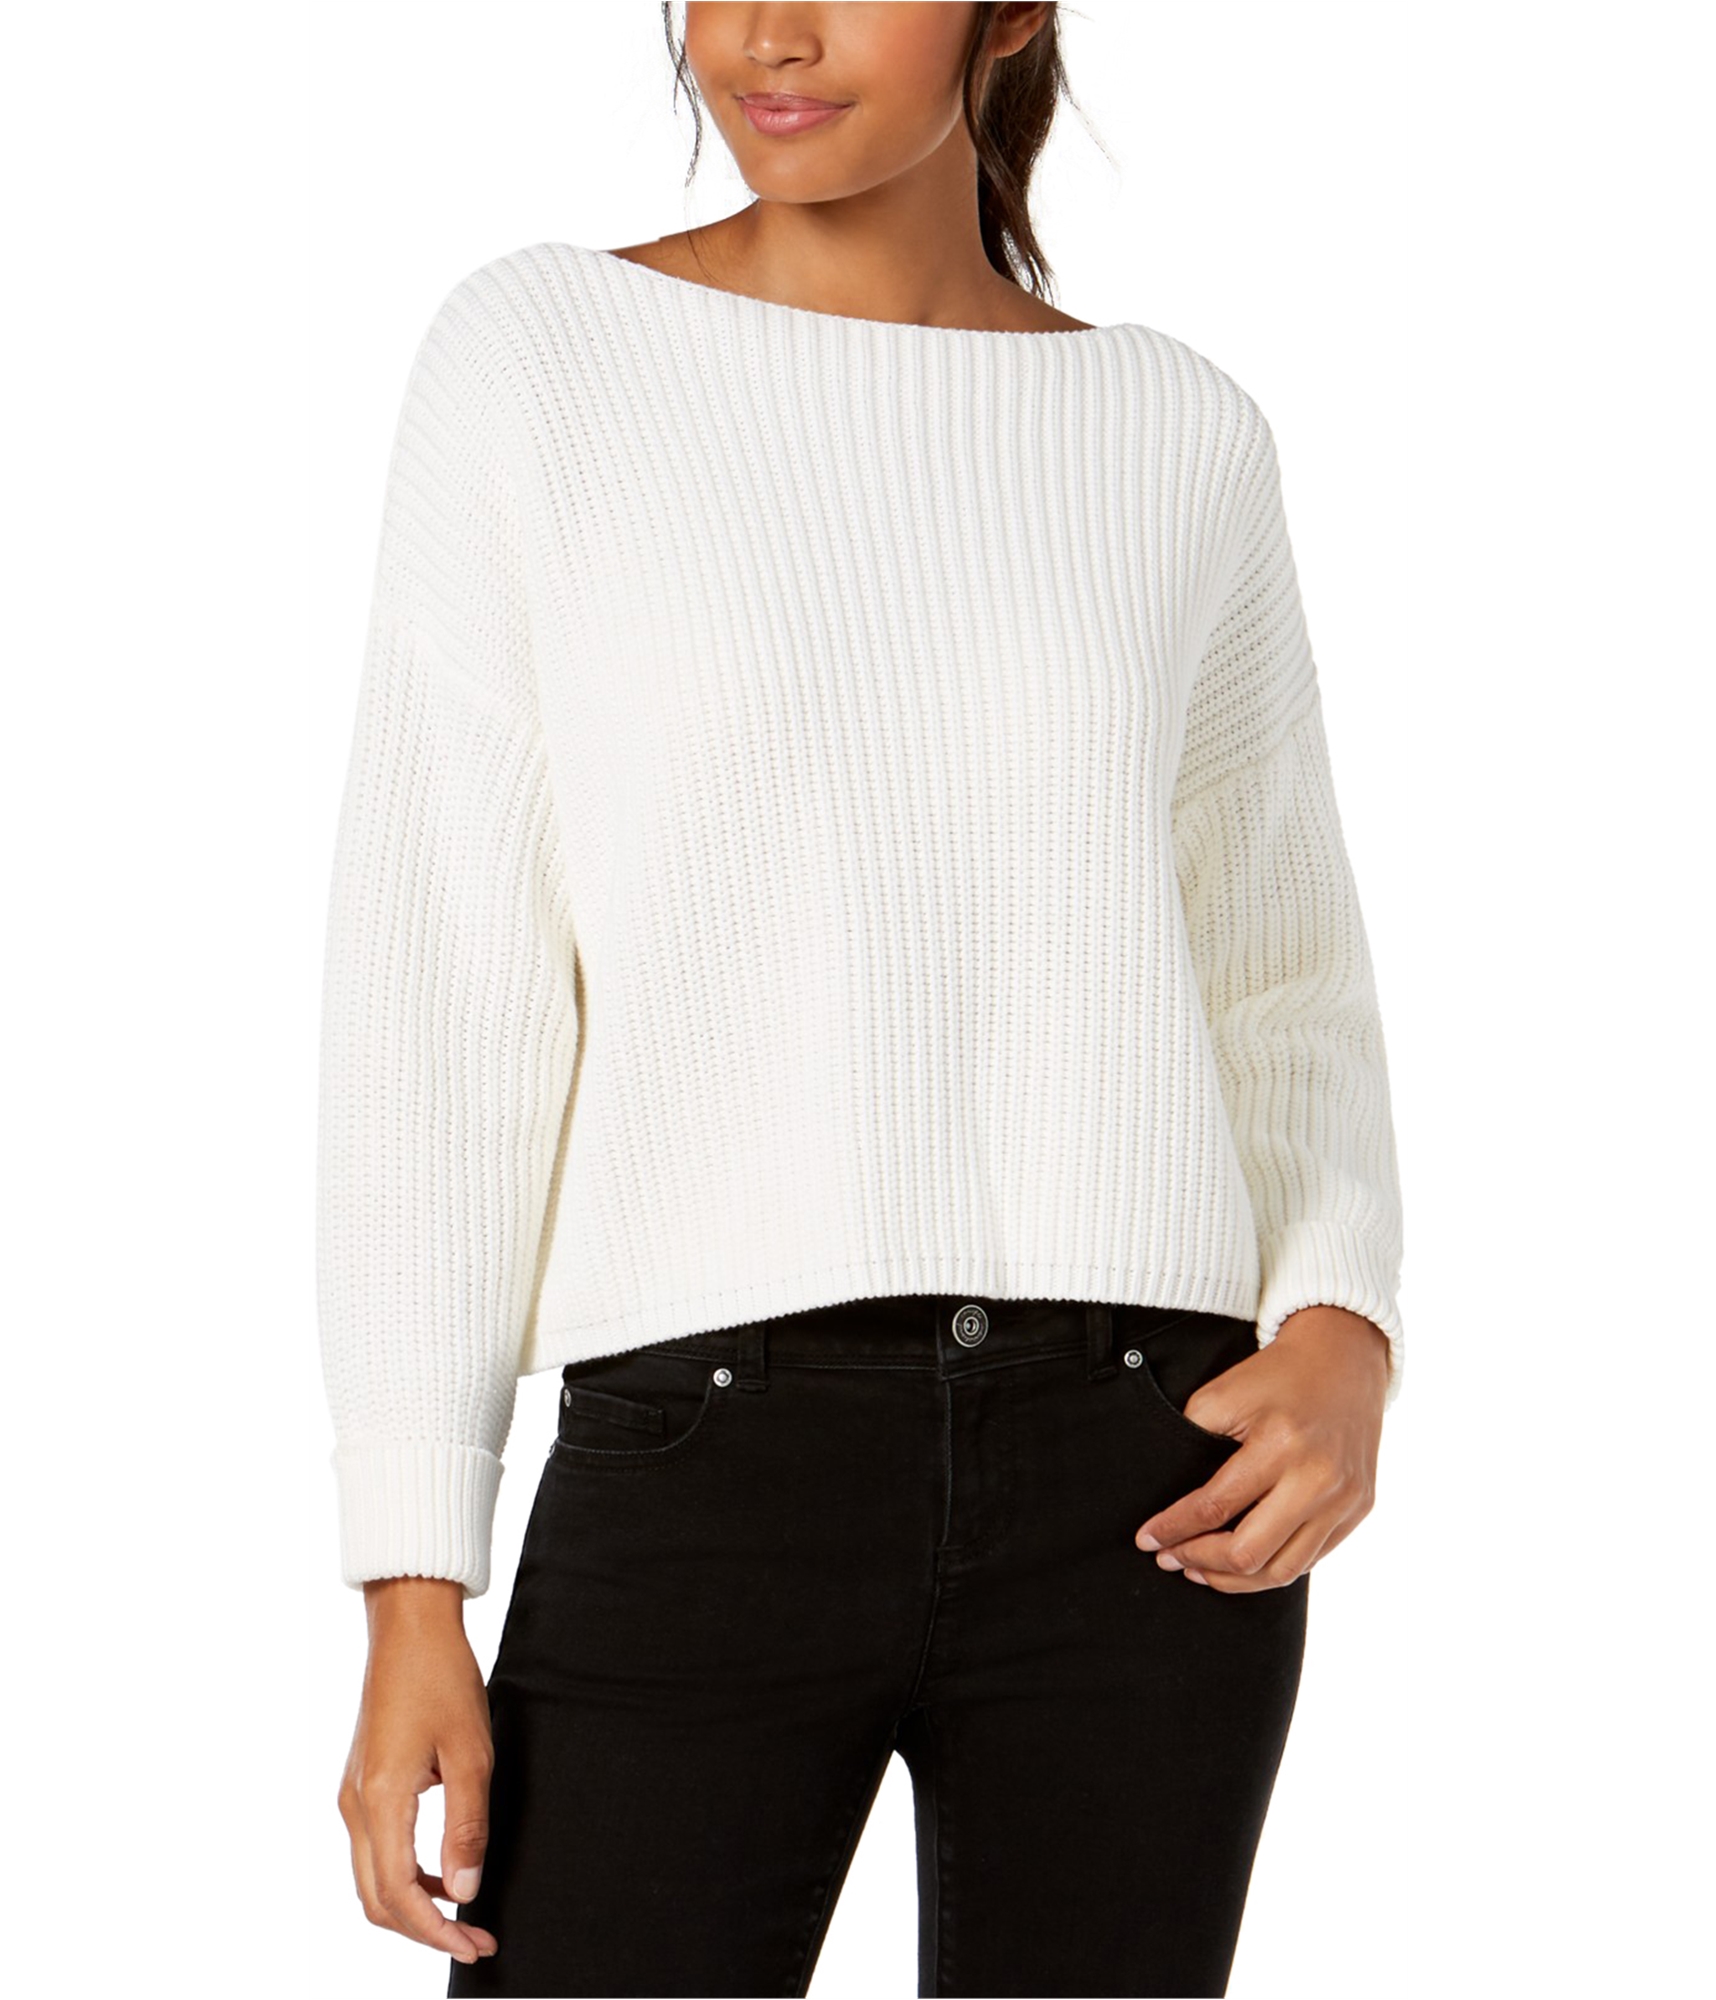 French Connection Womens Millie Pullover Sweater, White, Large | eBay